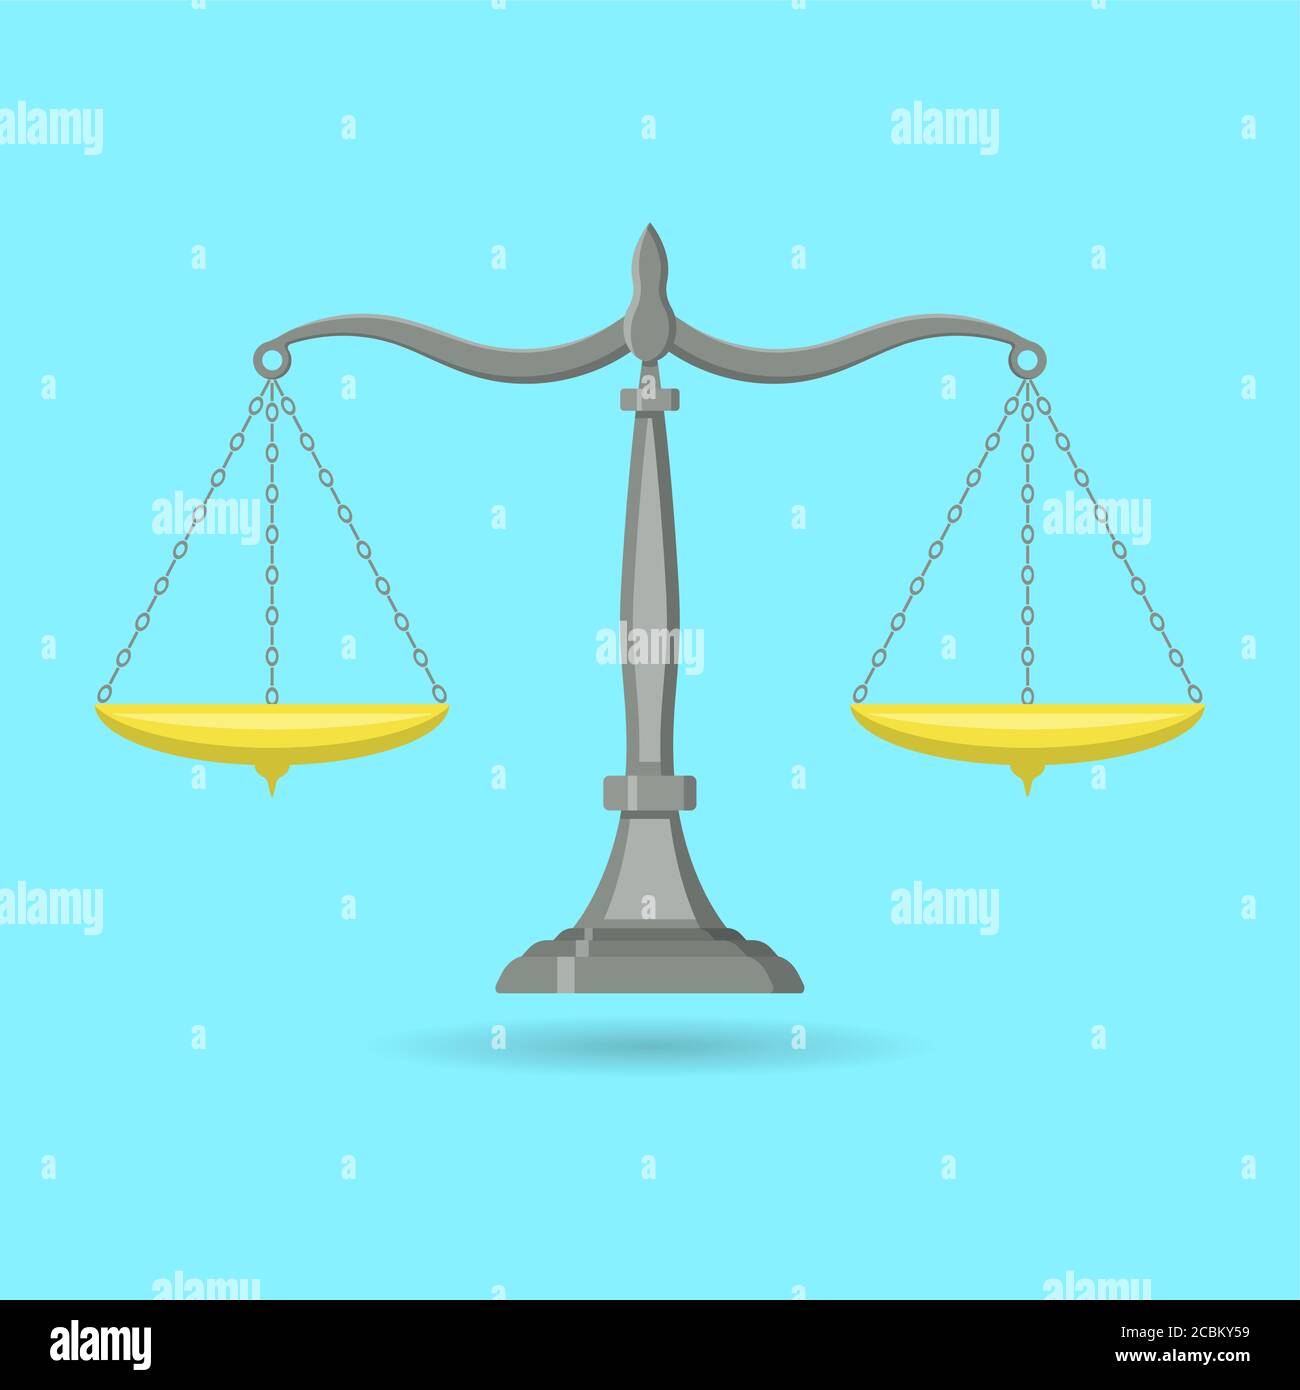 https://c8.alamy.com/comp/2CBKY59/badge-scalesicon-balancesymbol-of-justice-law-a-vector-illustration-in-flat-style-with-a-shadow-2CBKY59.jpg